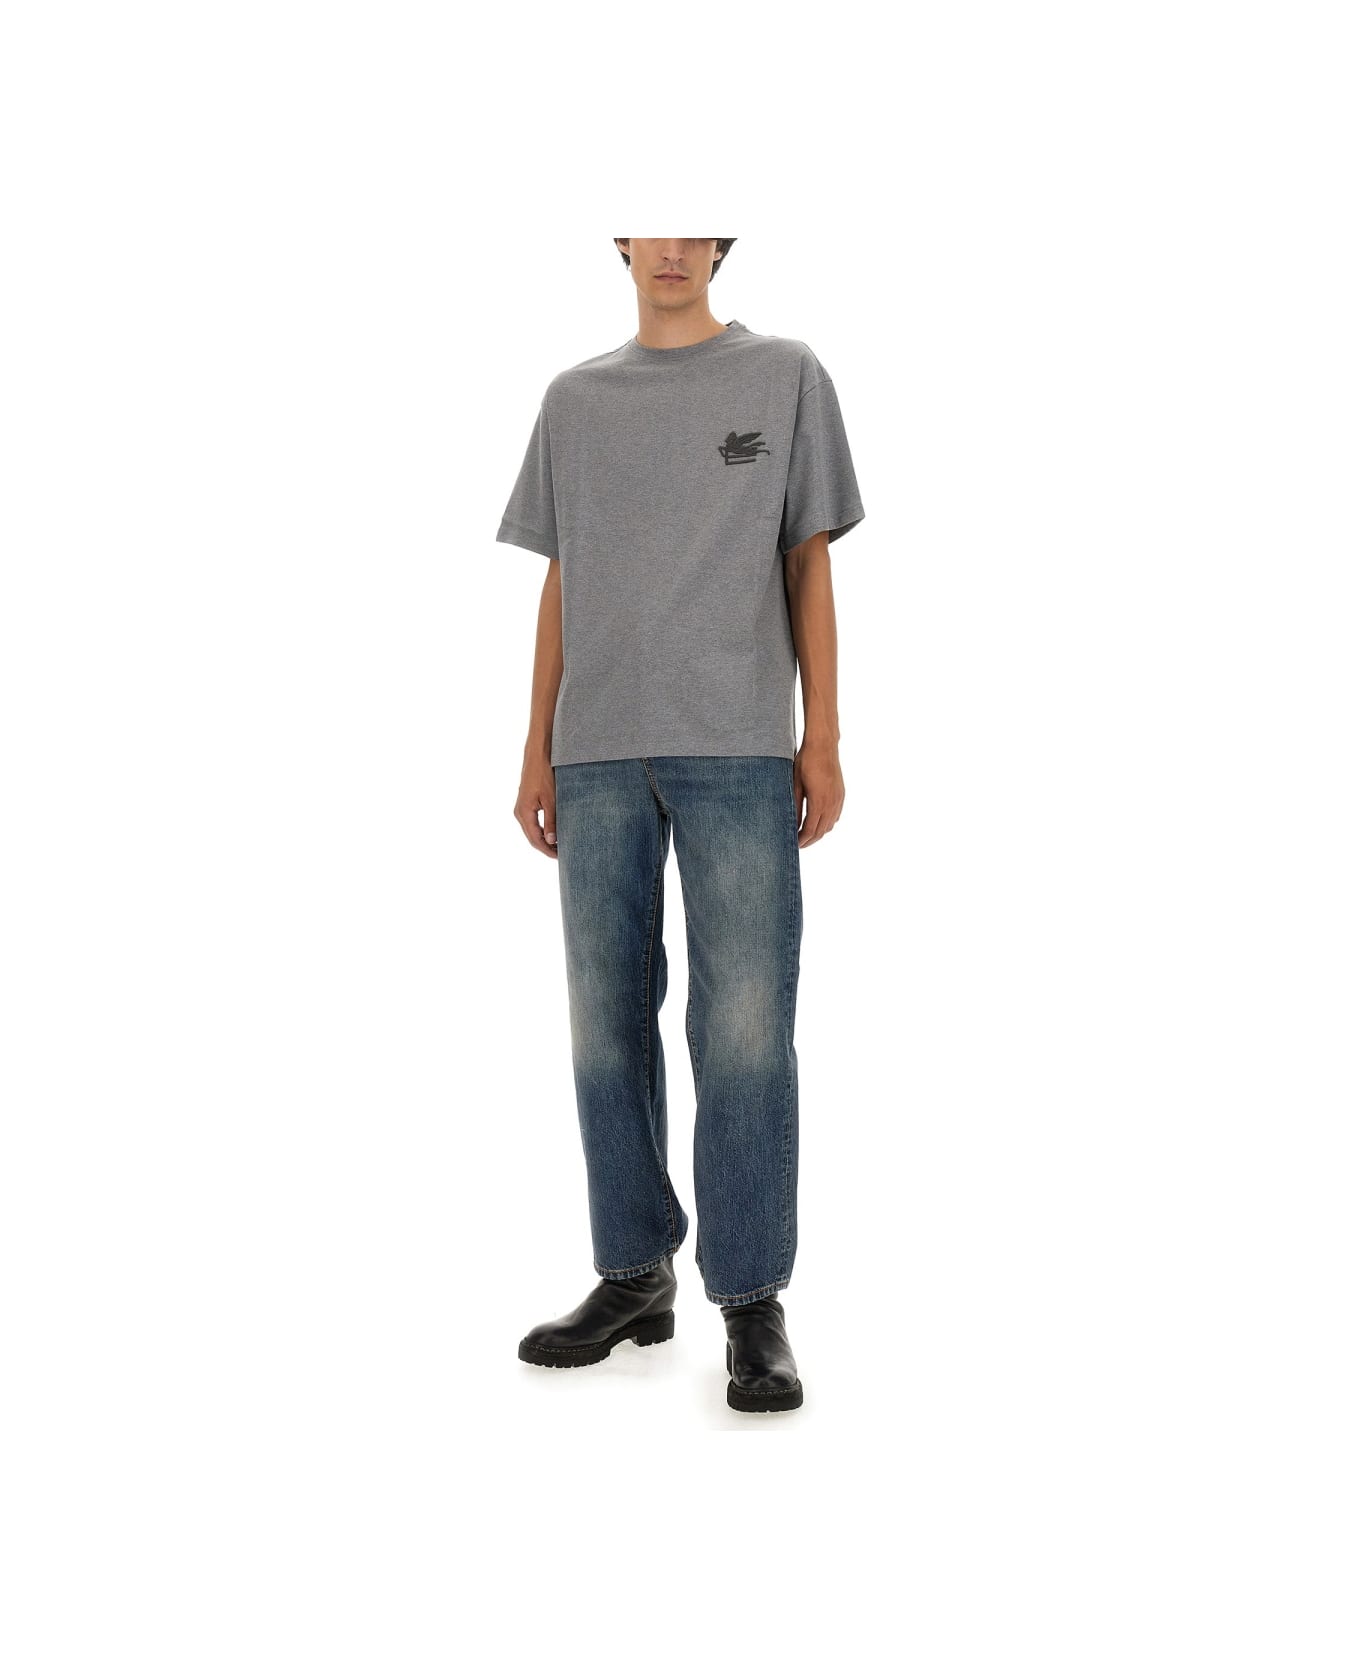 Etro T-shirt With Pegasus Embroidery - GREY シャツ